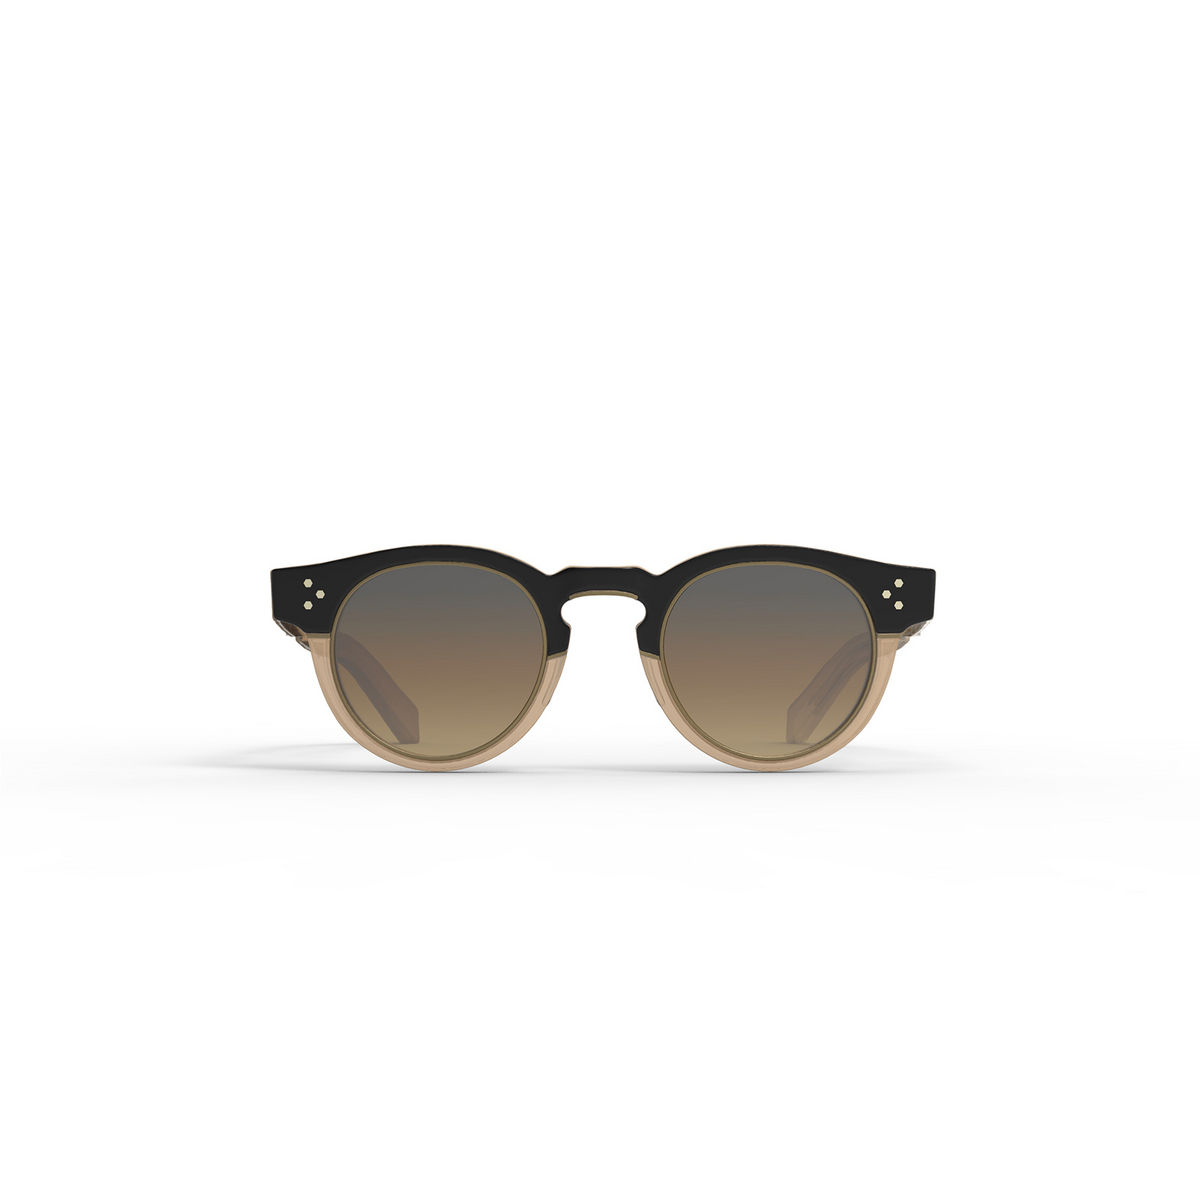 Mr. Leight® Round Sunglasses: Kennedy S color Black Tar-antique Gold/smokey Bktr-atg/smky - front view.